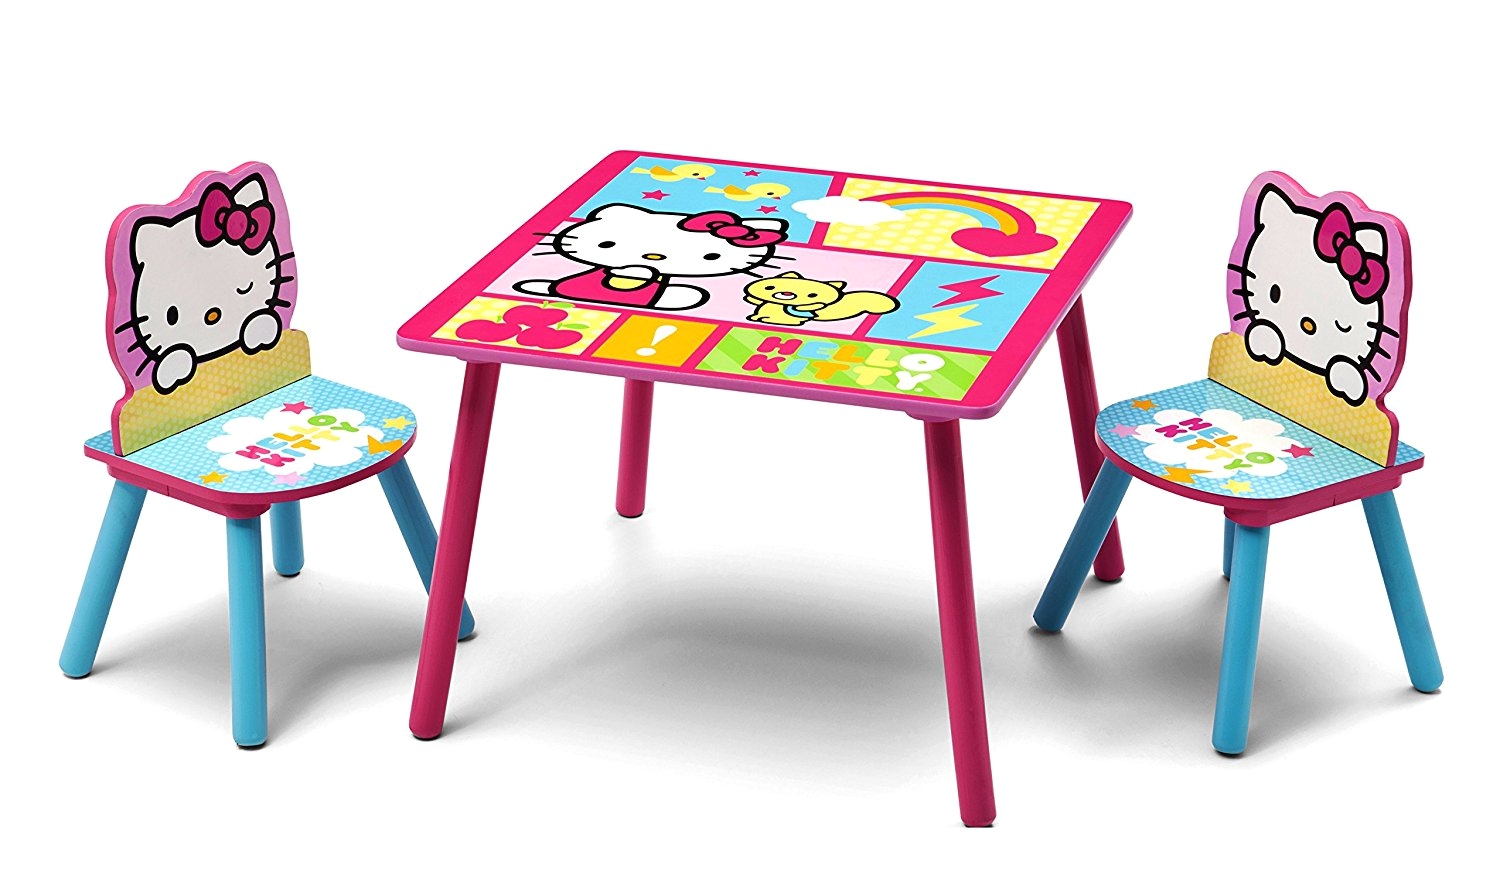 Toys R Us Table and Chairs Set Minnie Mouse Table and Chairs Walmart Chair Set toys R Us Disney